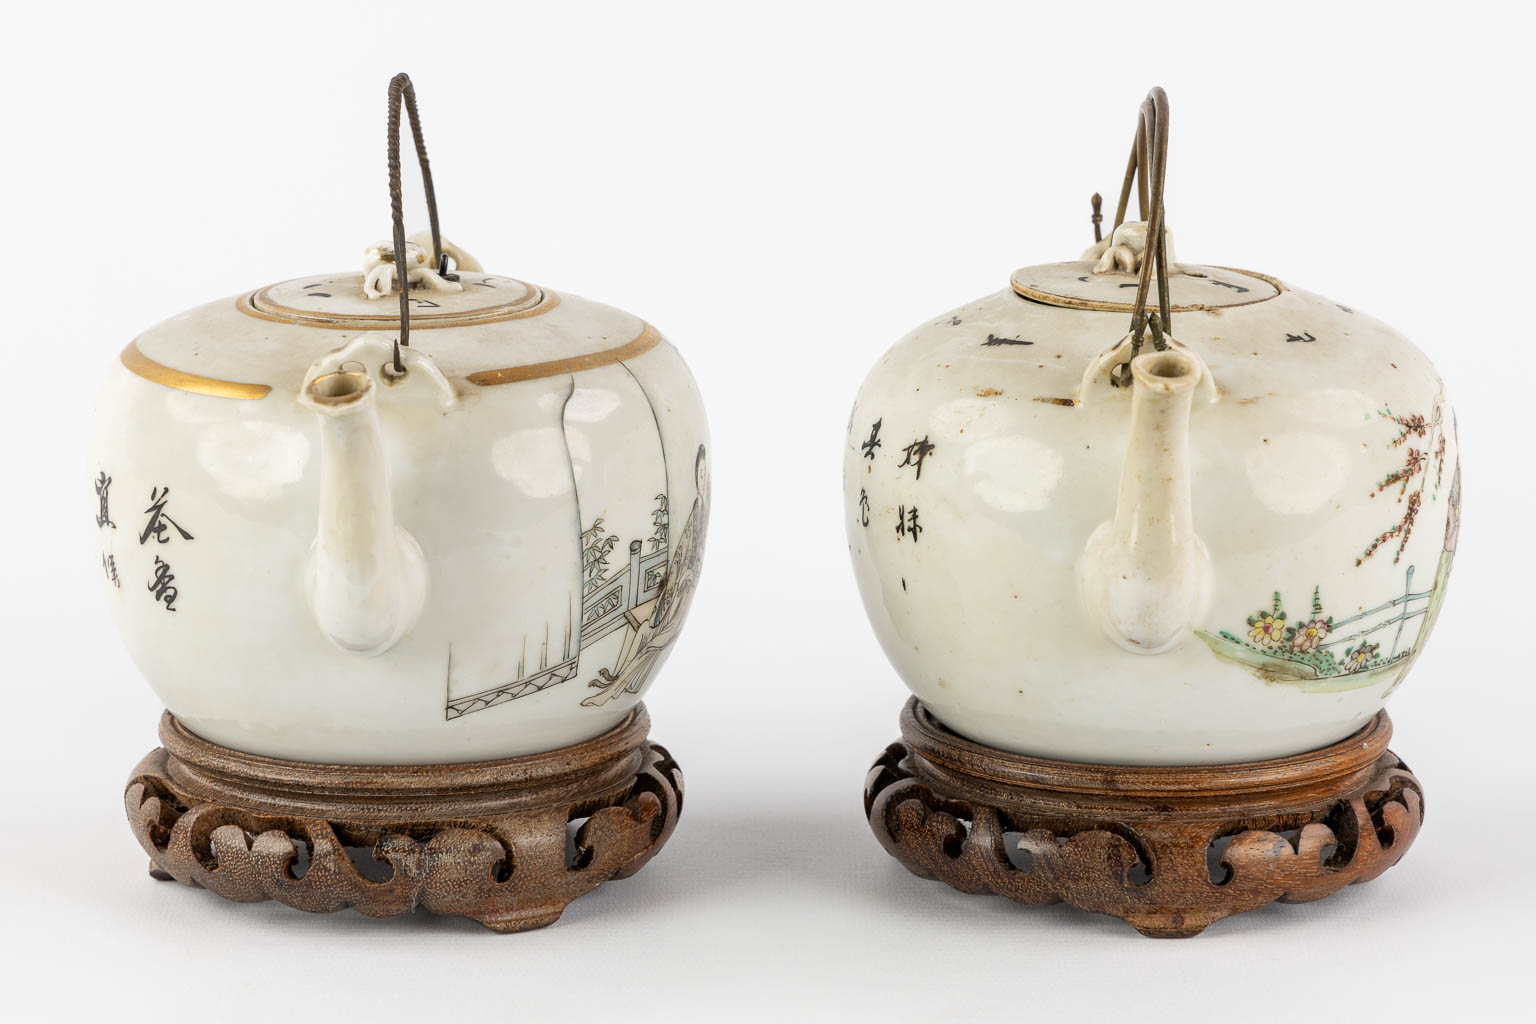 Two Chinese teapots, decorated with figurines. (L:13 x W:17,5 x H:10 cm) - Image 4 of 14